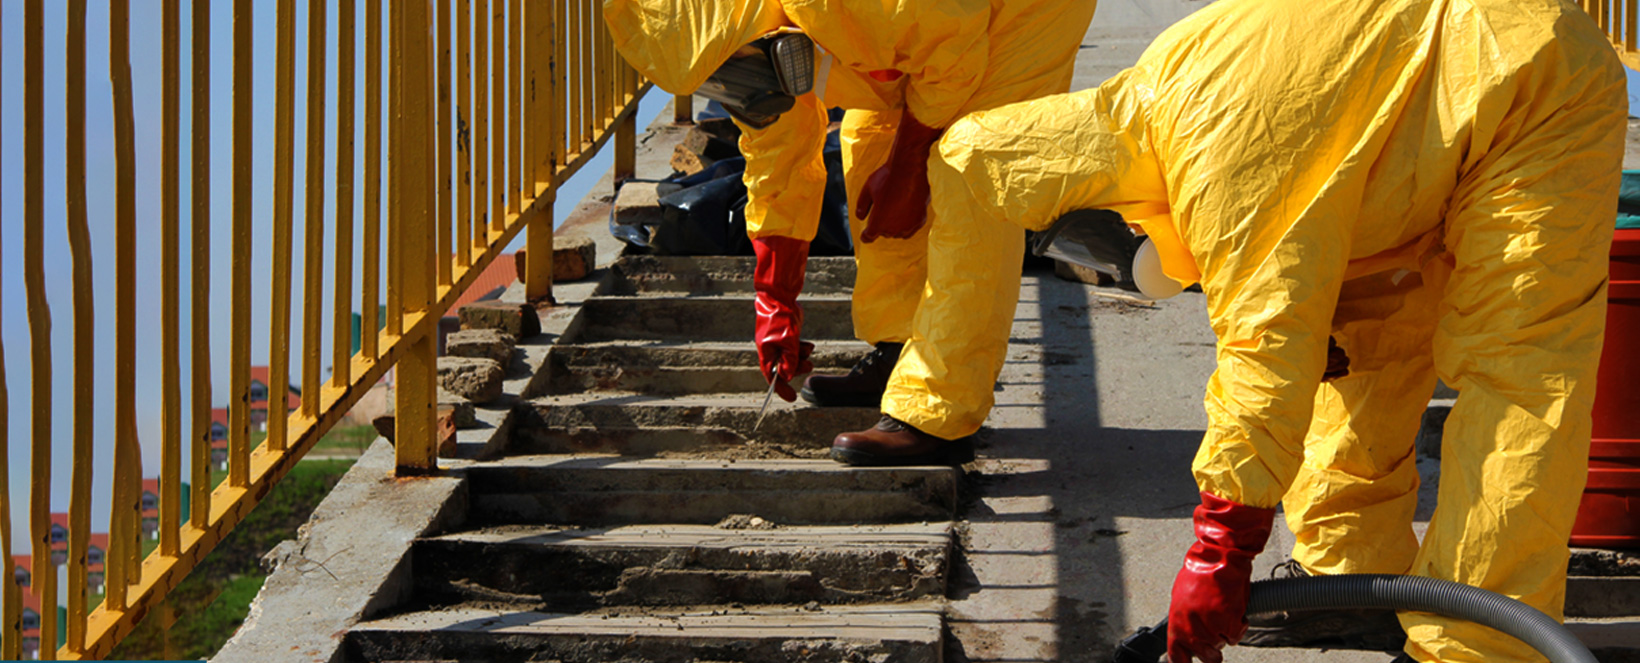 Hazardous Material Removal Services in Canada - Fresh Air Abatement